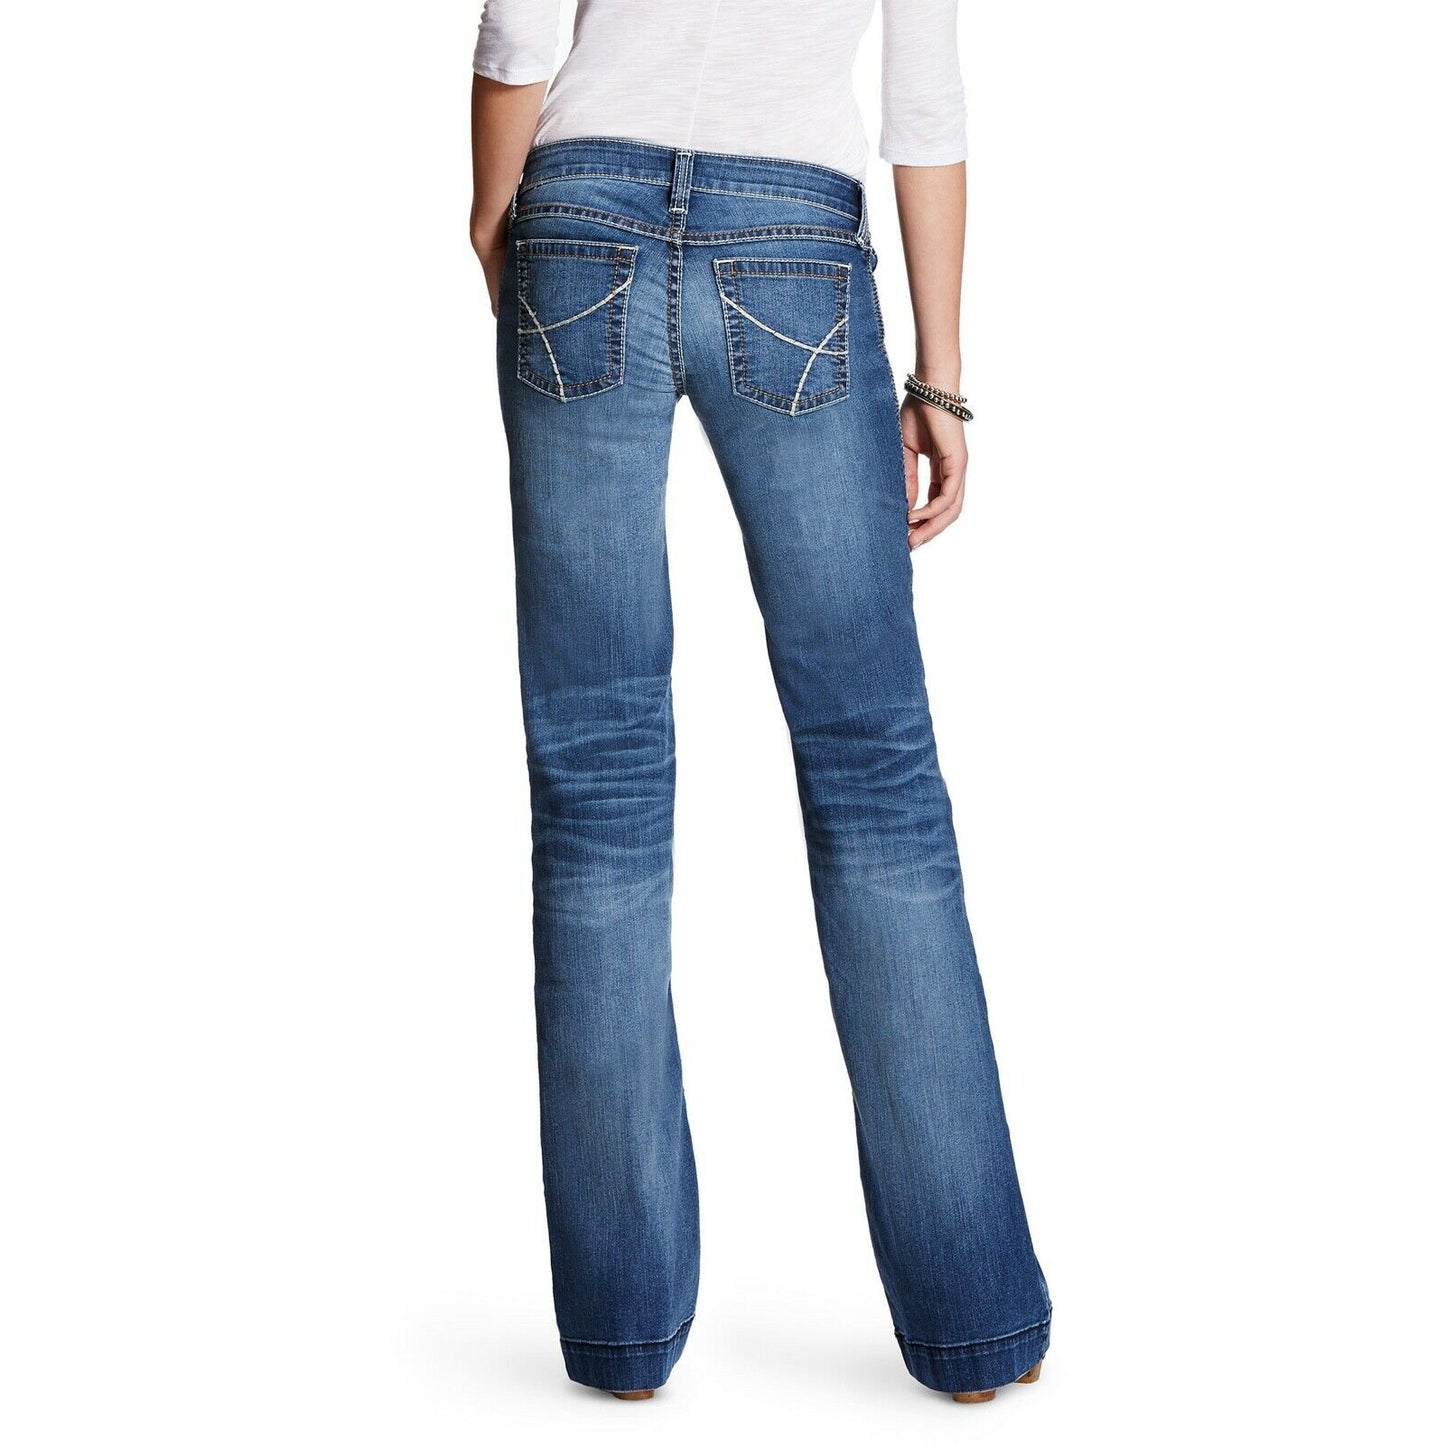 Load image into Gallery viewer, Ariat® Ladies Trouser Mid Rise Baseball Stitch Stretch Jeans 10021883
